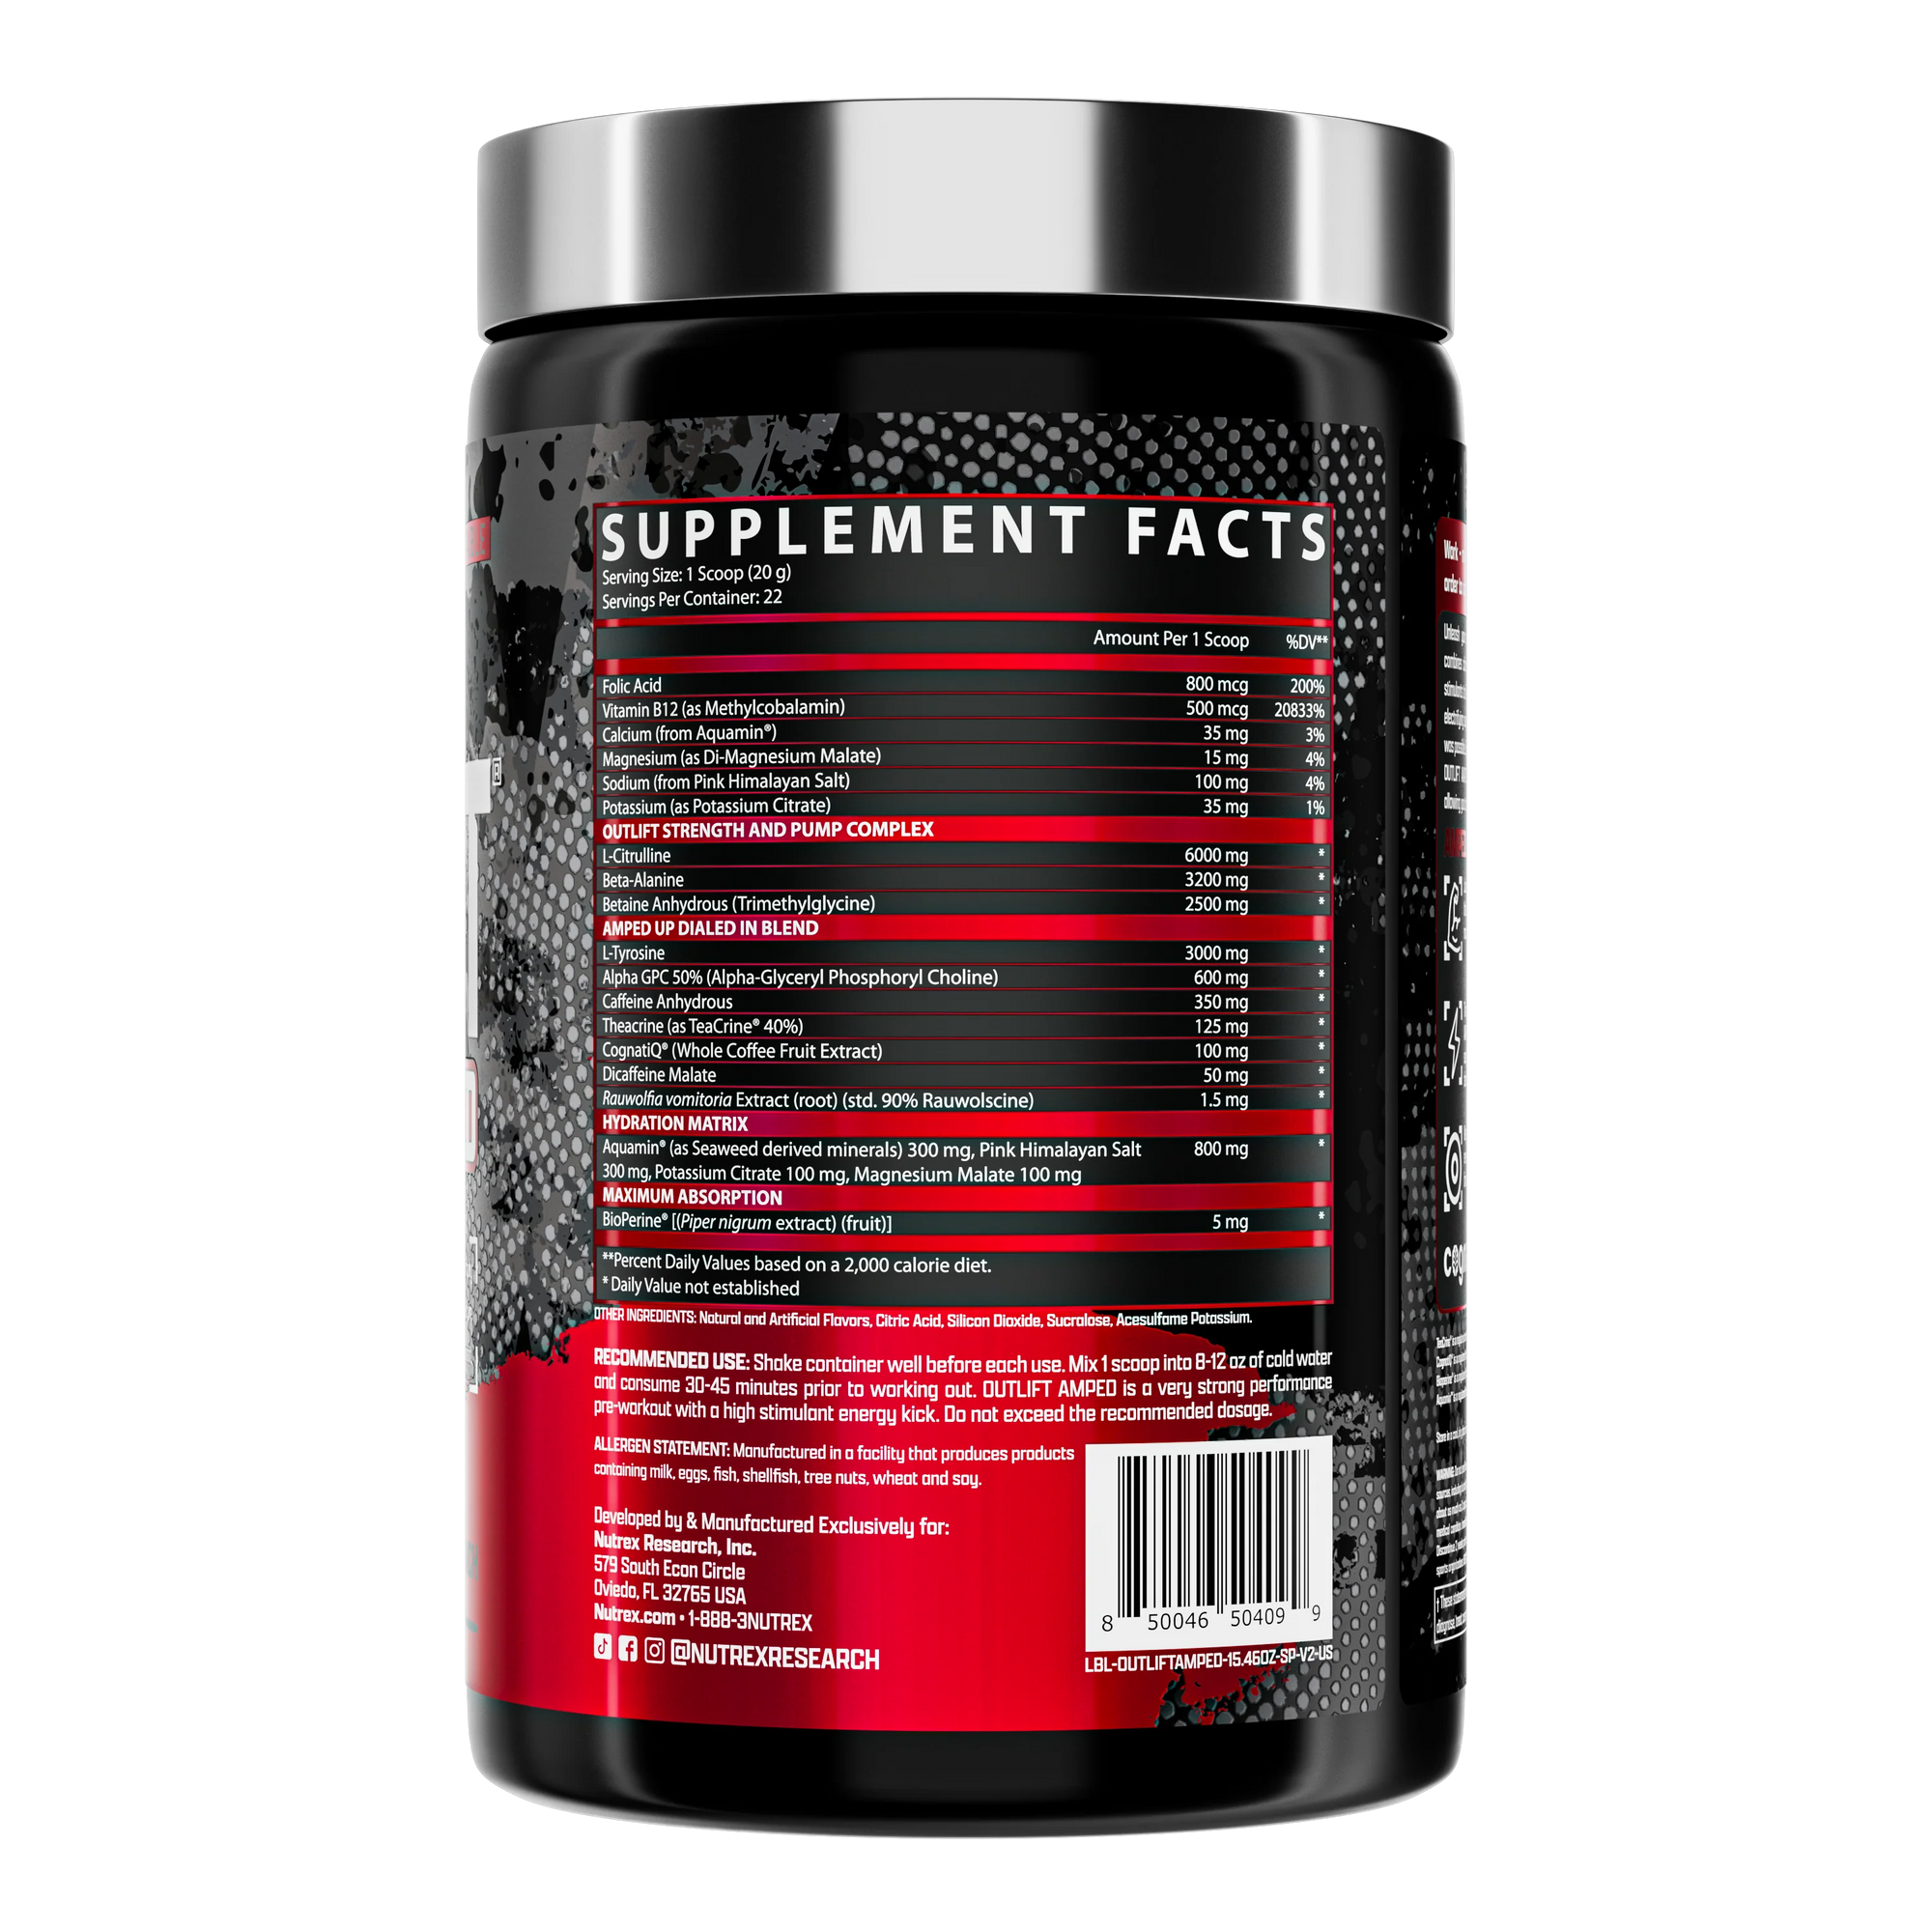 Nutrex Research Outlift Amped - Sucker Punch - Bemoxie Supplements